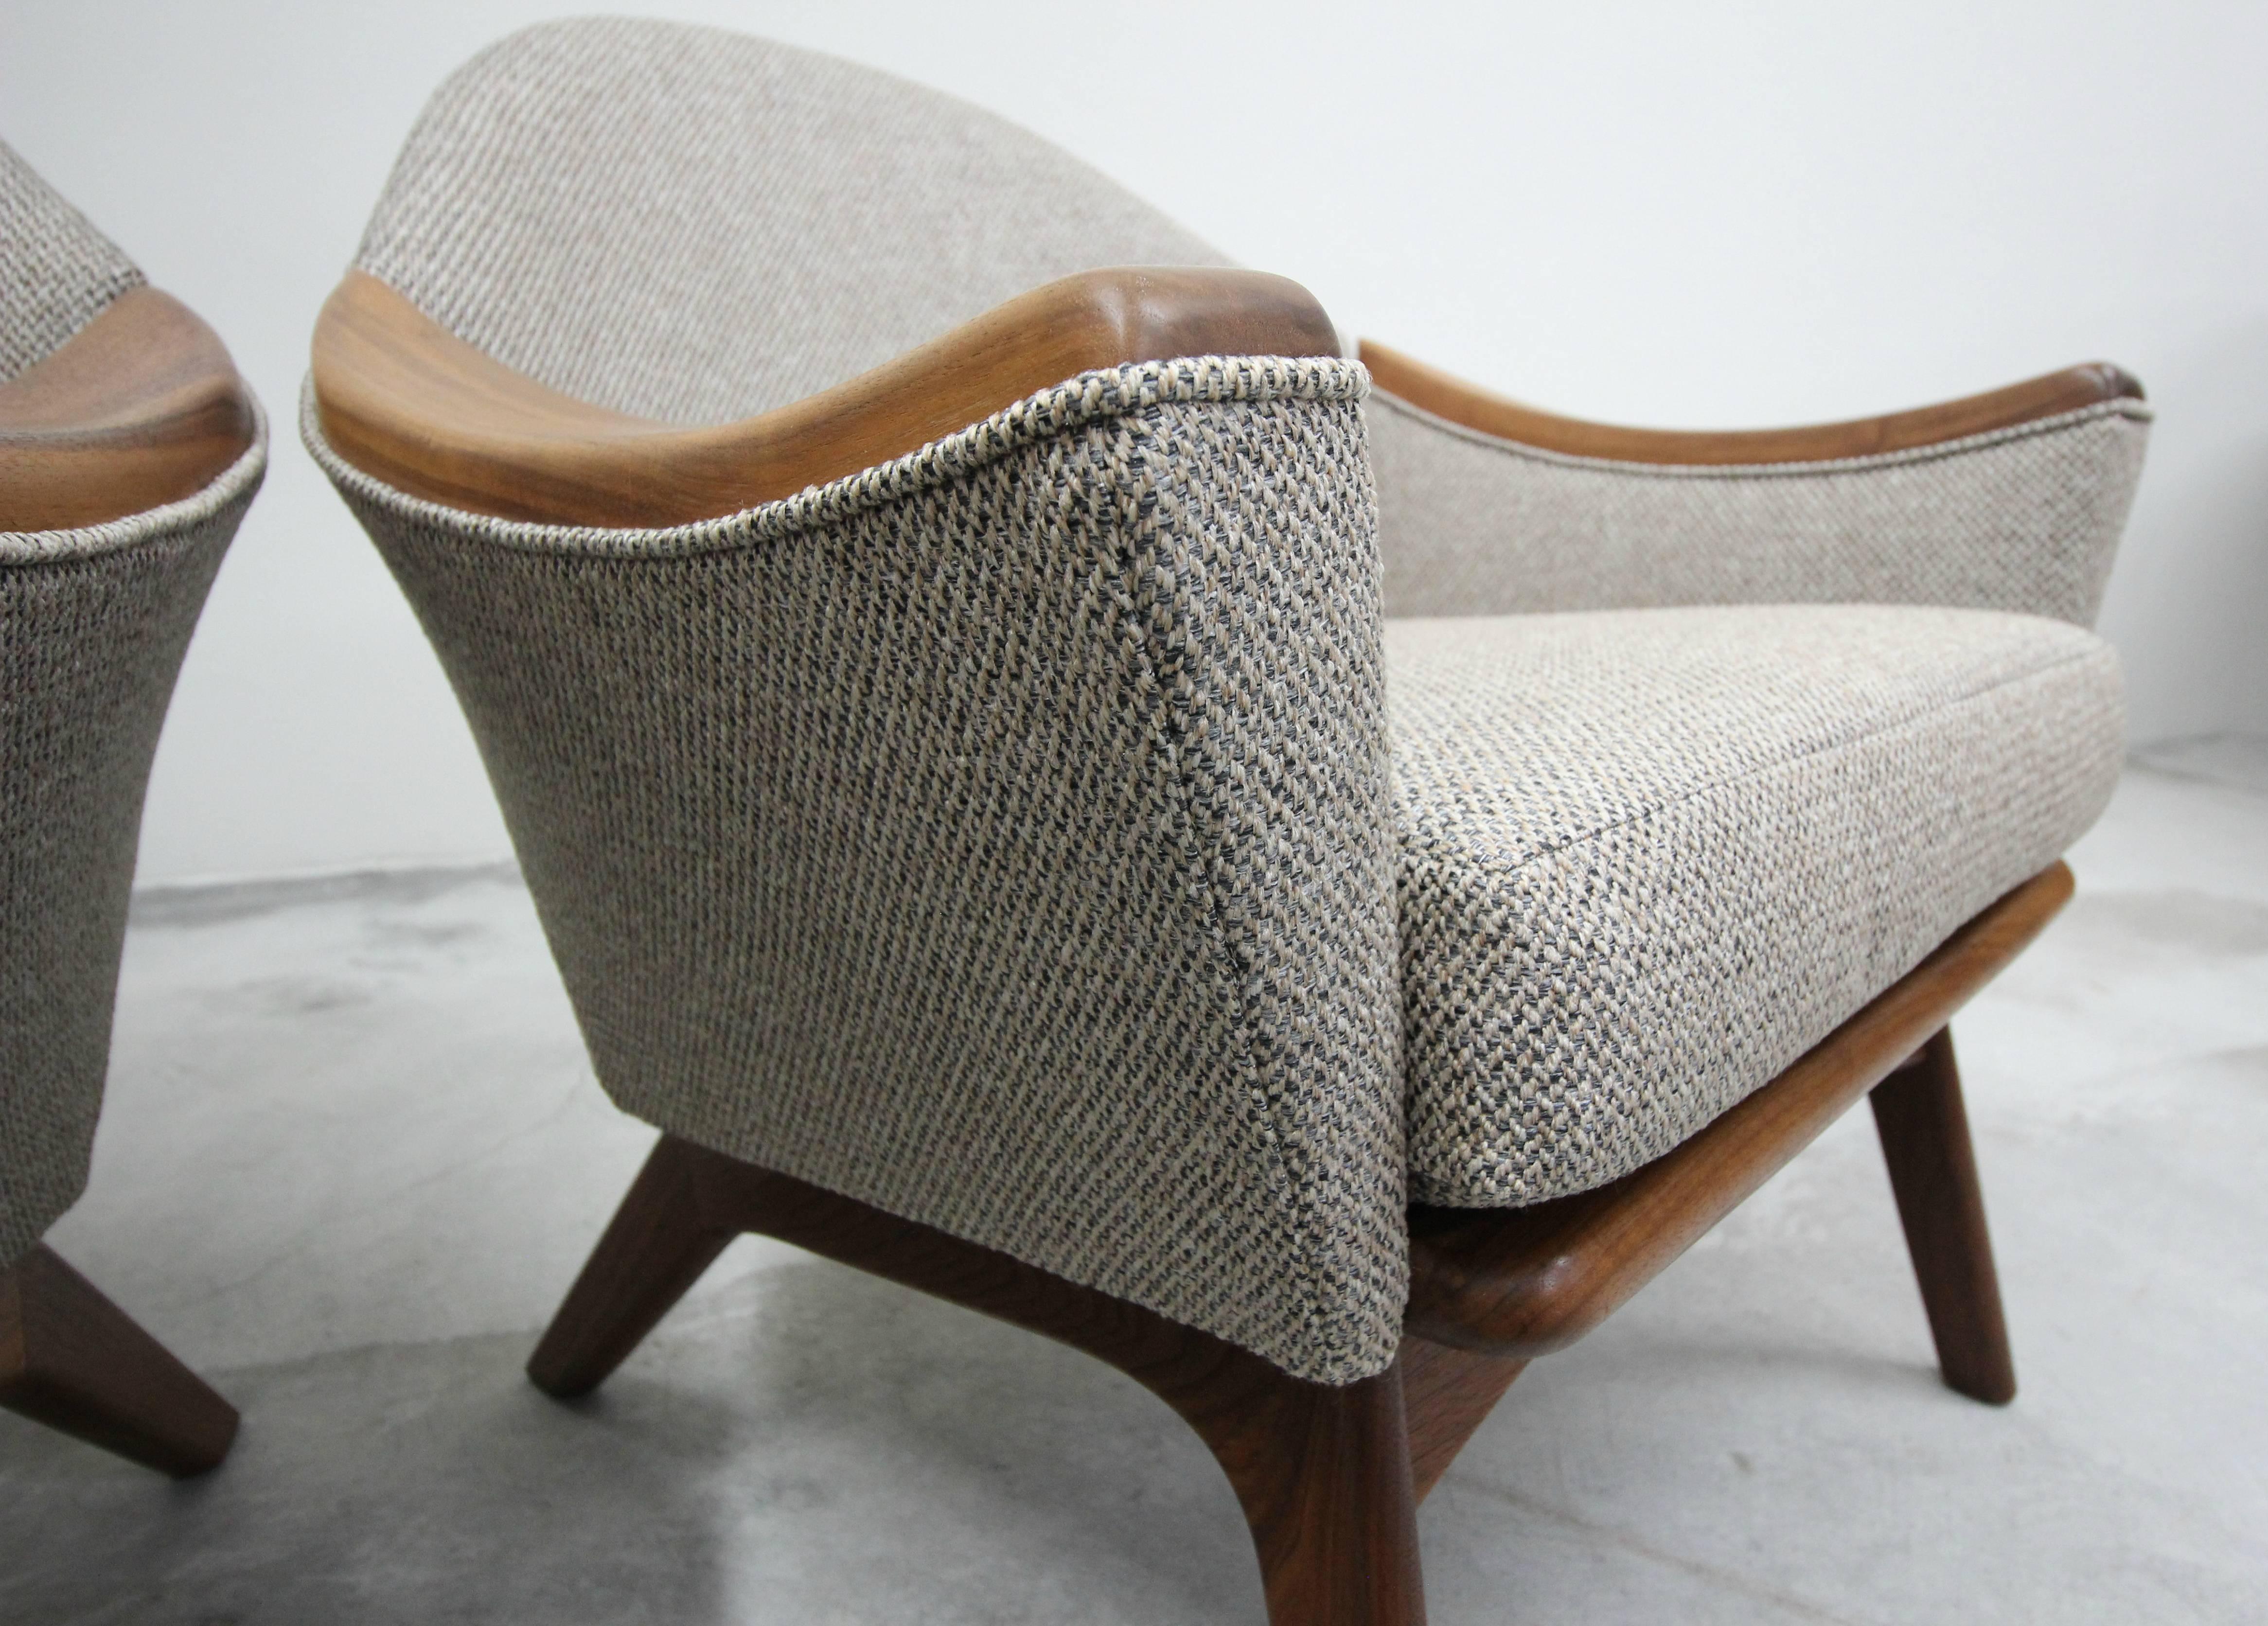 Pair of Midcentury Lounge Chairs by Adrian Pearsall for Craft Associates 1